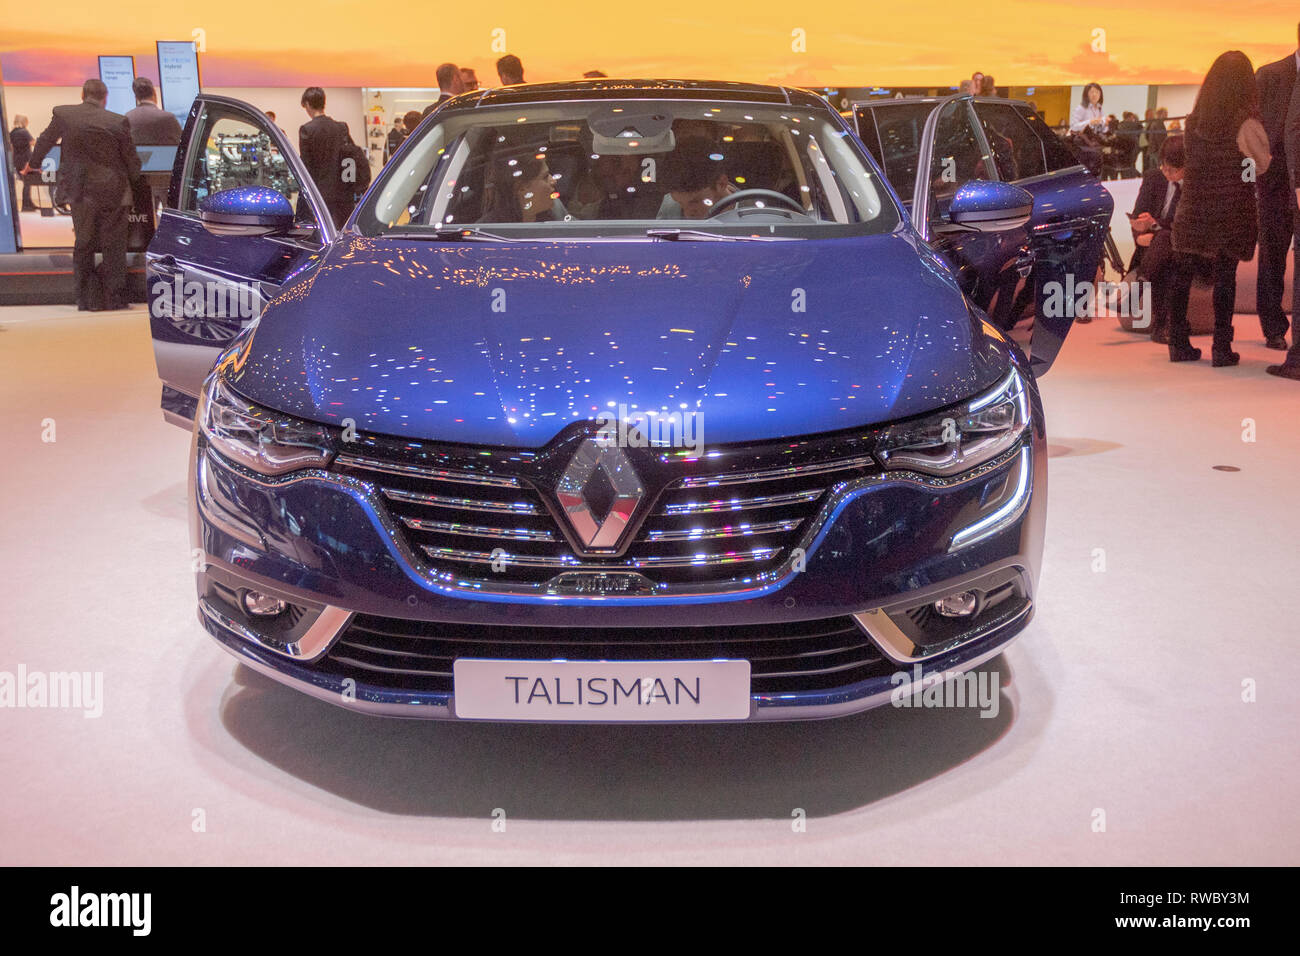 Renault Talisman High Resolution Stock Photography and Images - Alamy